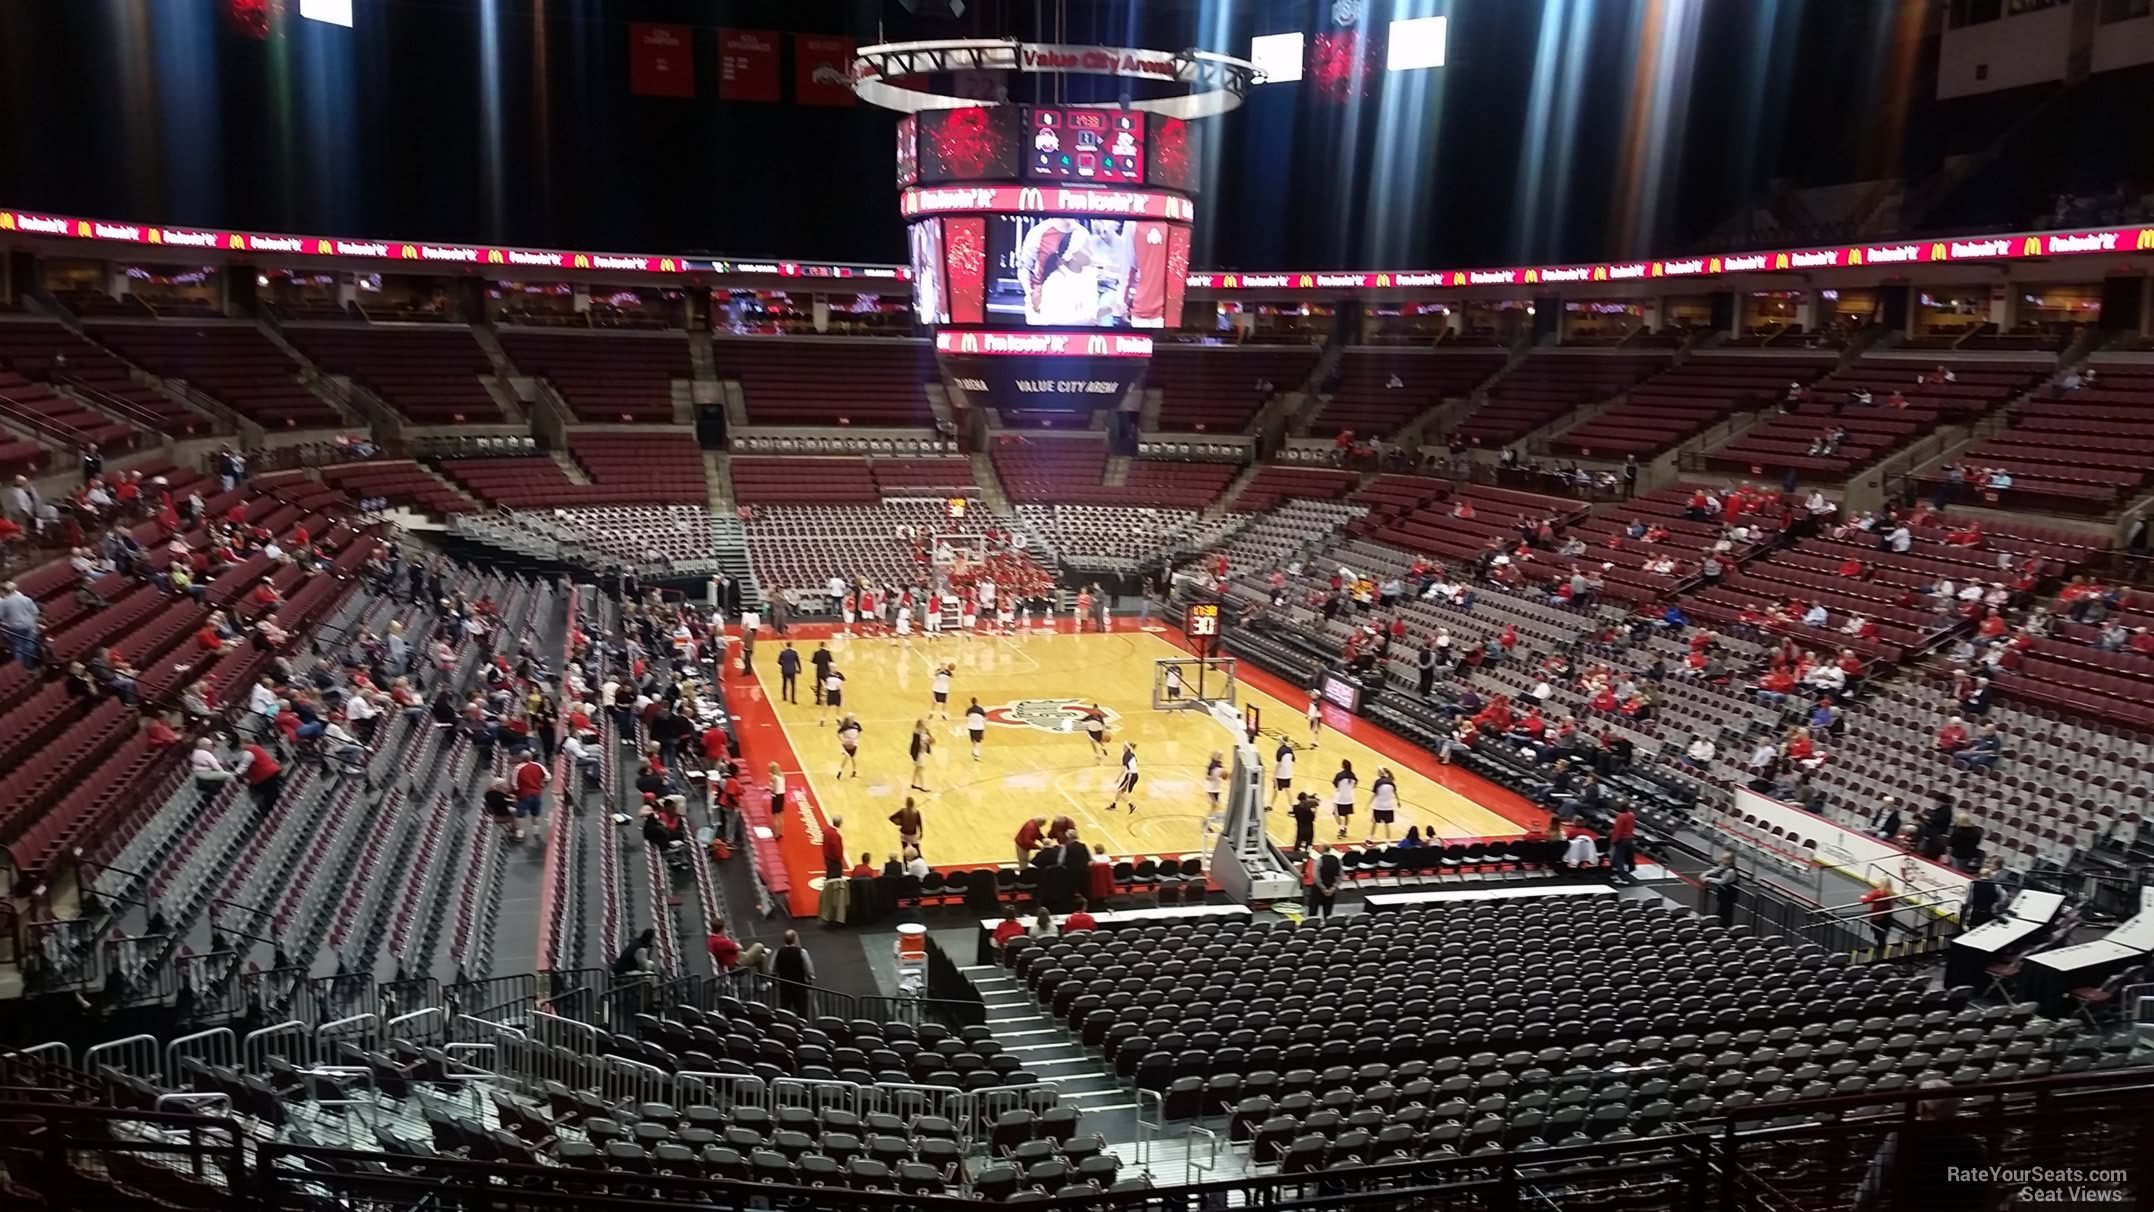 section 232, row h seat view  for basketball - schottenstein center